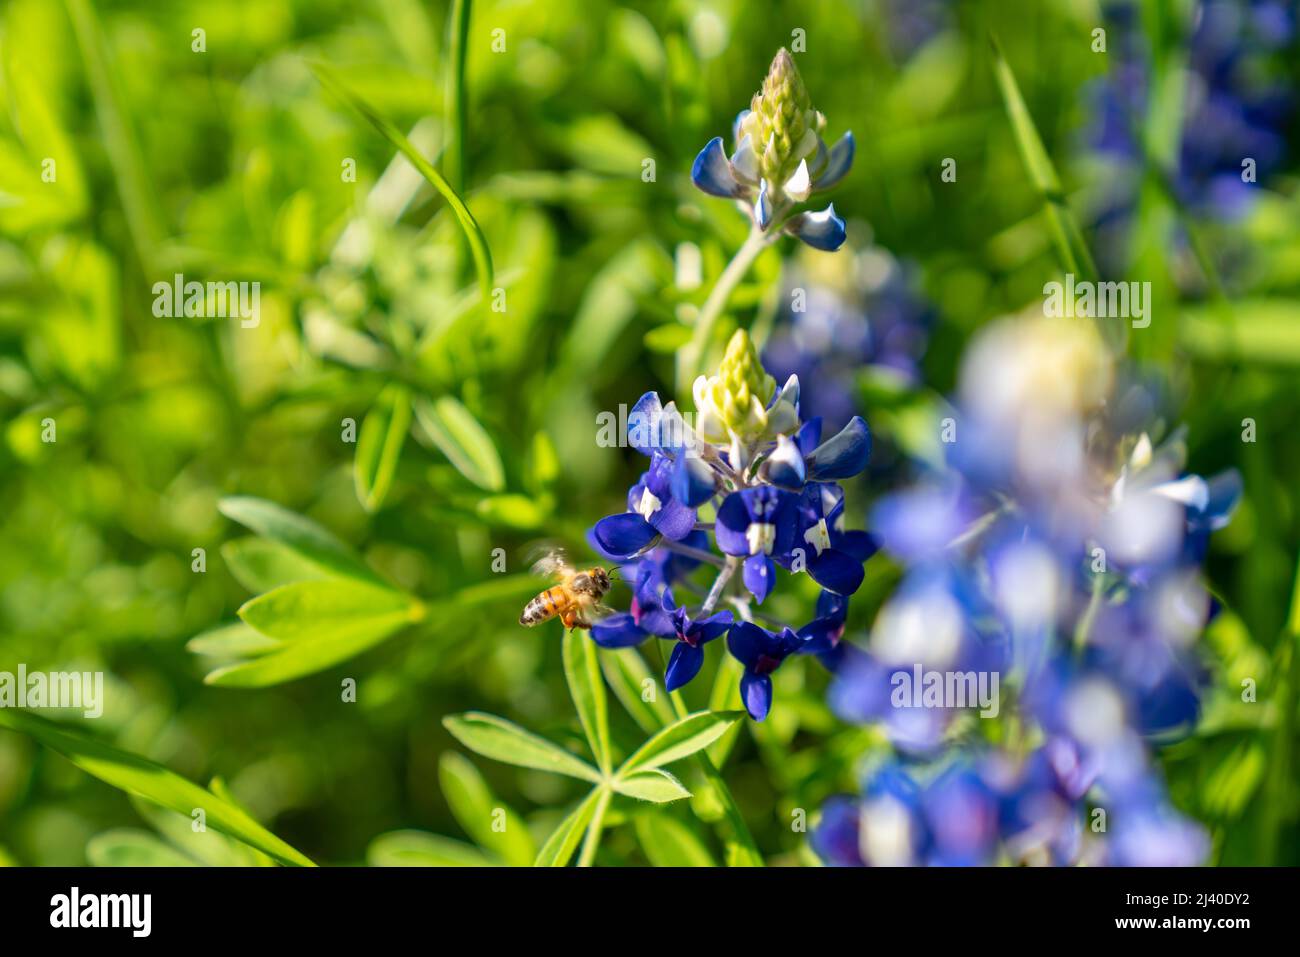 Closeup of a bumble bee collecting pollen on bluebonnets, Lupinus texensis, during an early spring bloom near Ennis, Texas. Stock Photo